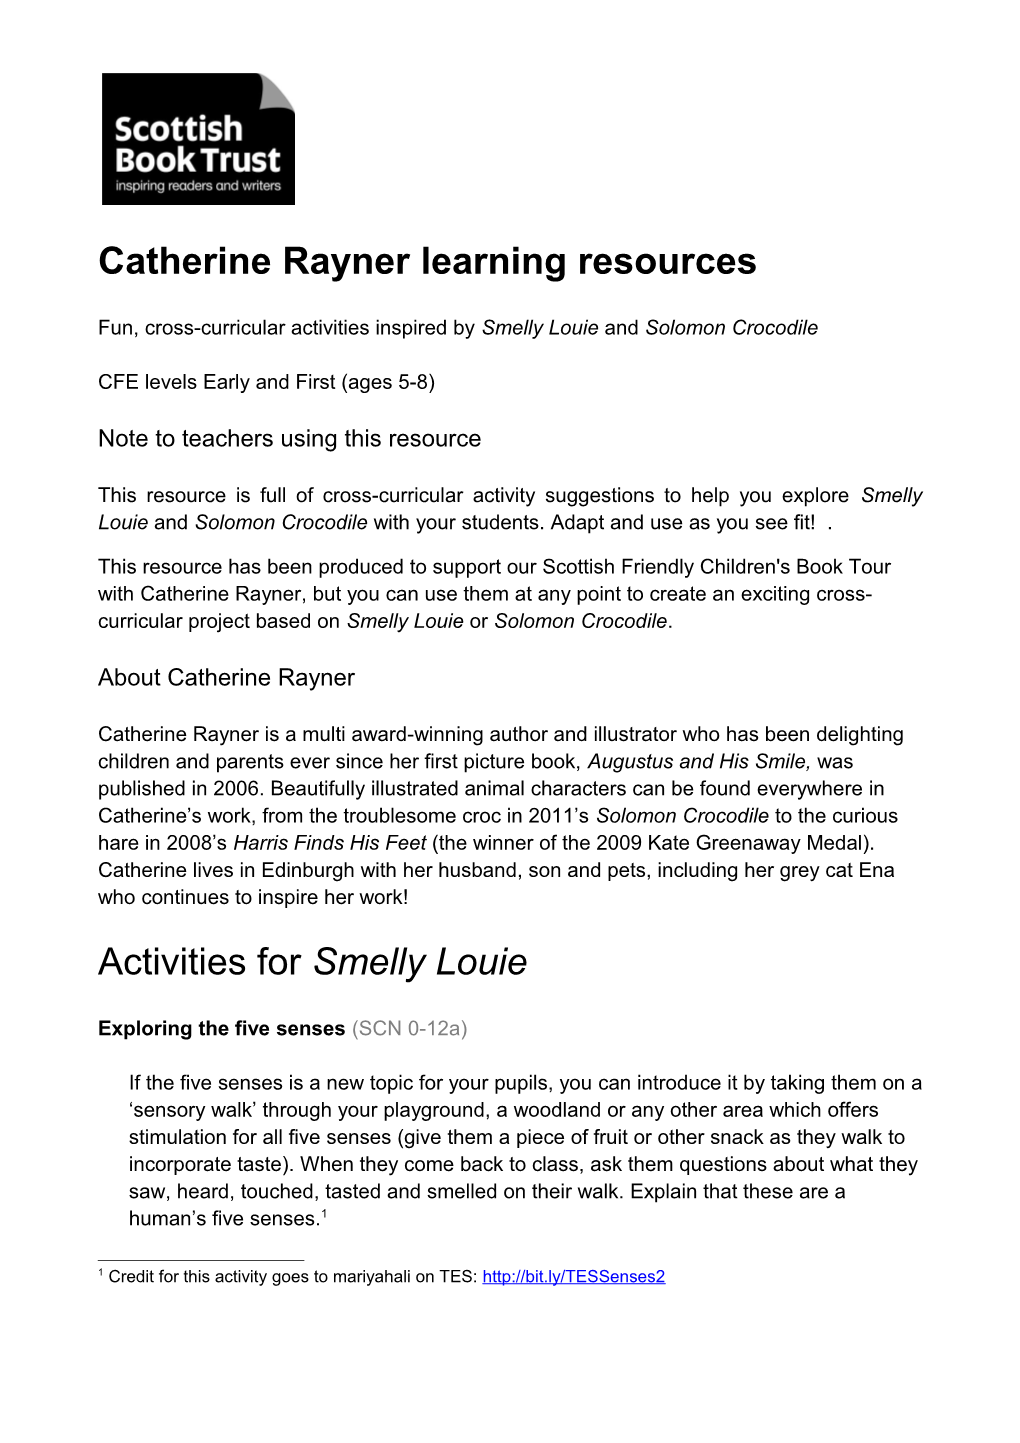 Catherine Rayner Learning Resources